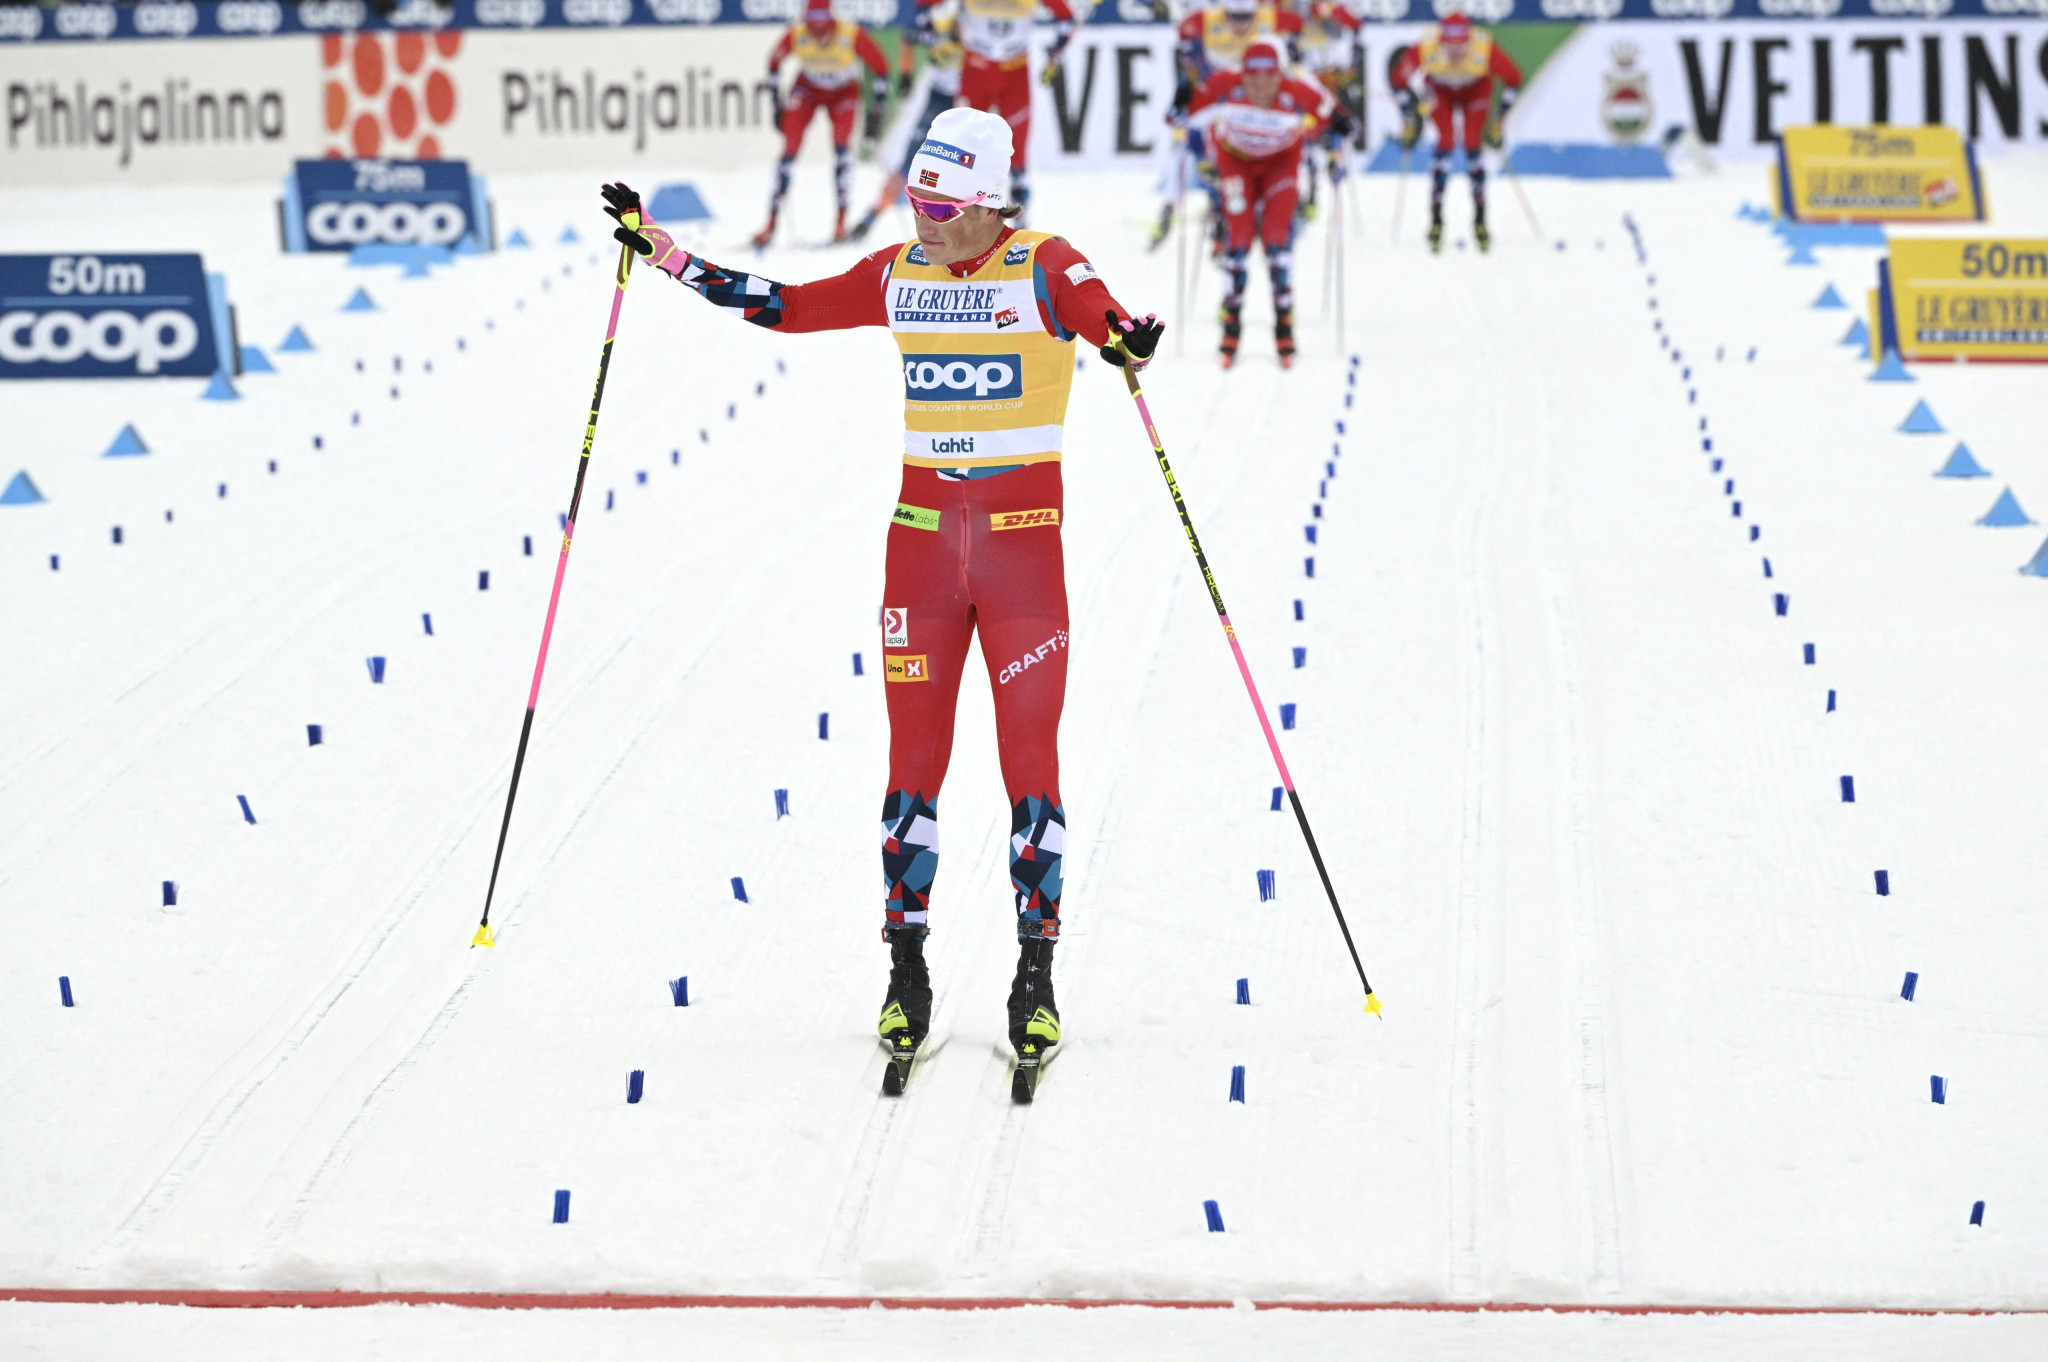 Norway's Johannes Høsflot Klæbo earned a 20th victory of the season in the final race in Lahti ©Getty Images